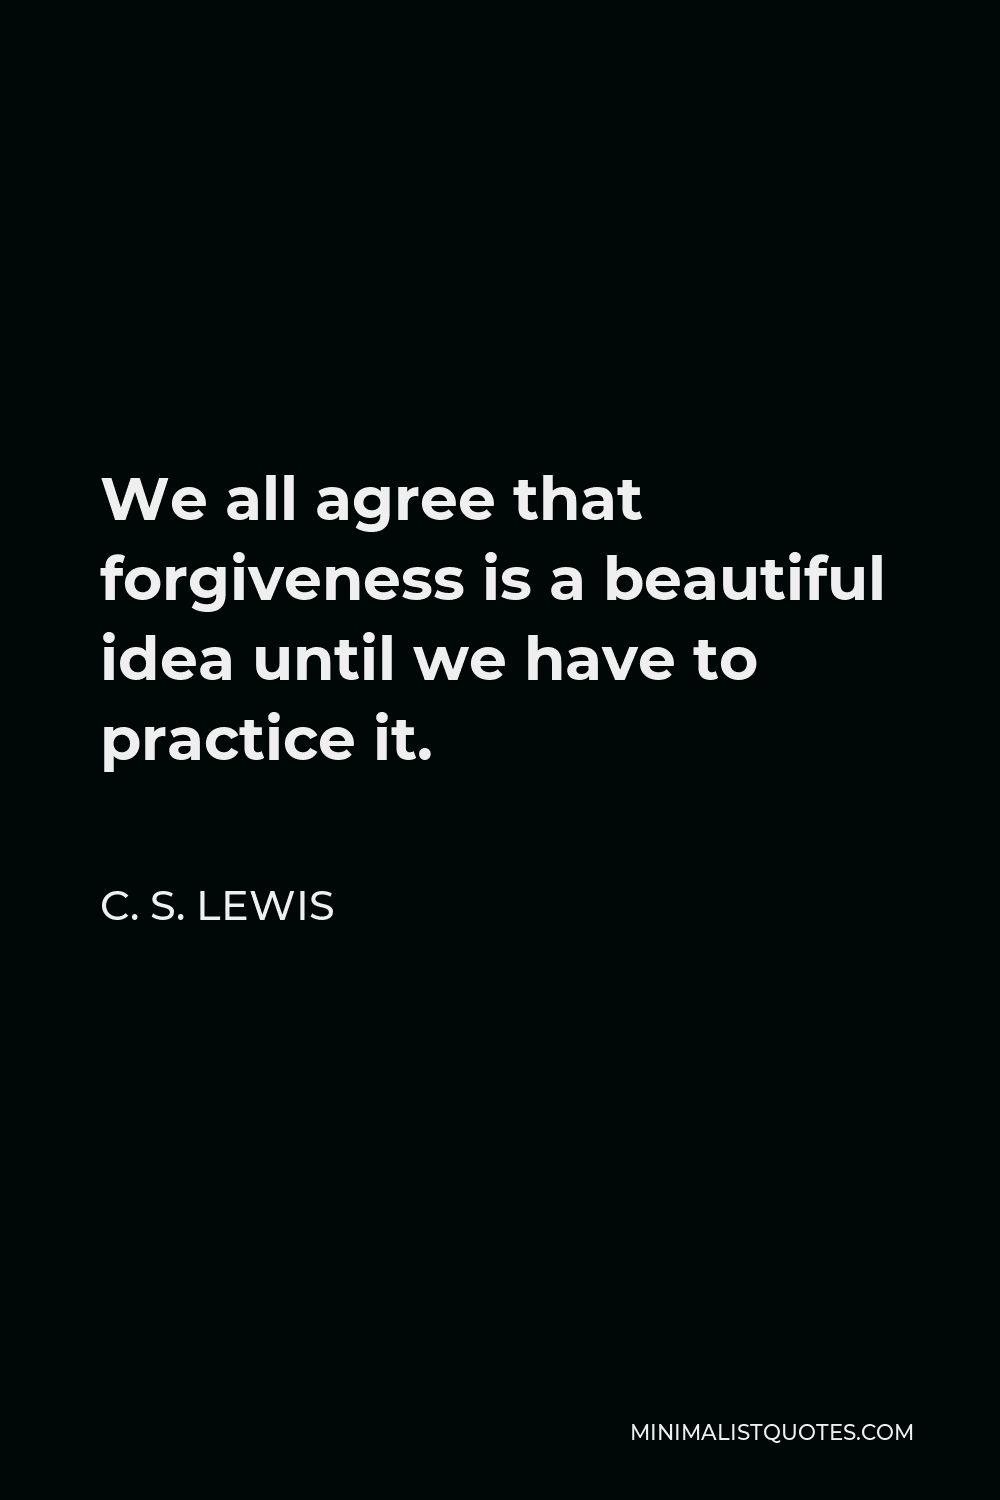 C. S. Lewis Quote - We all agree that forgiveness is a beautiful idea until we have to practice it.